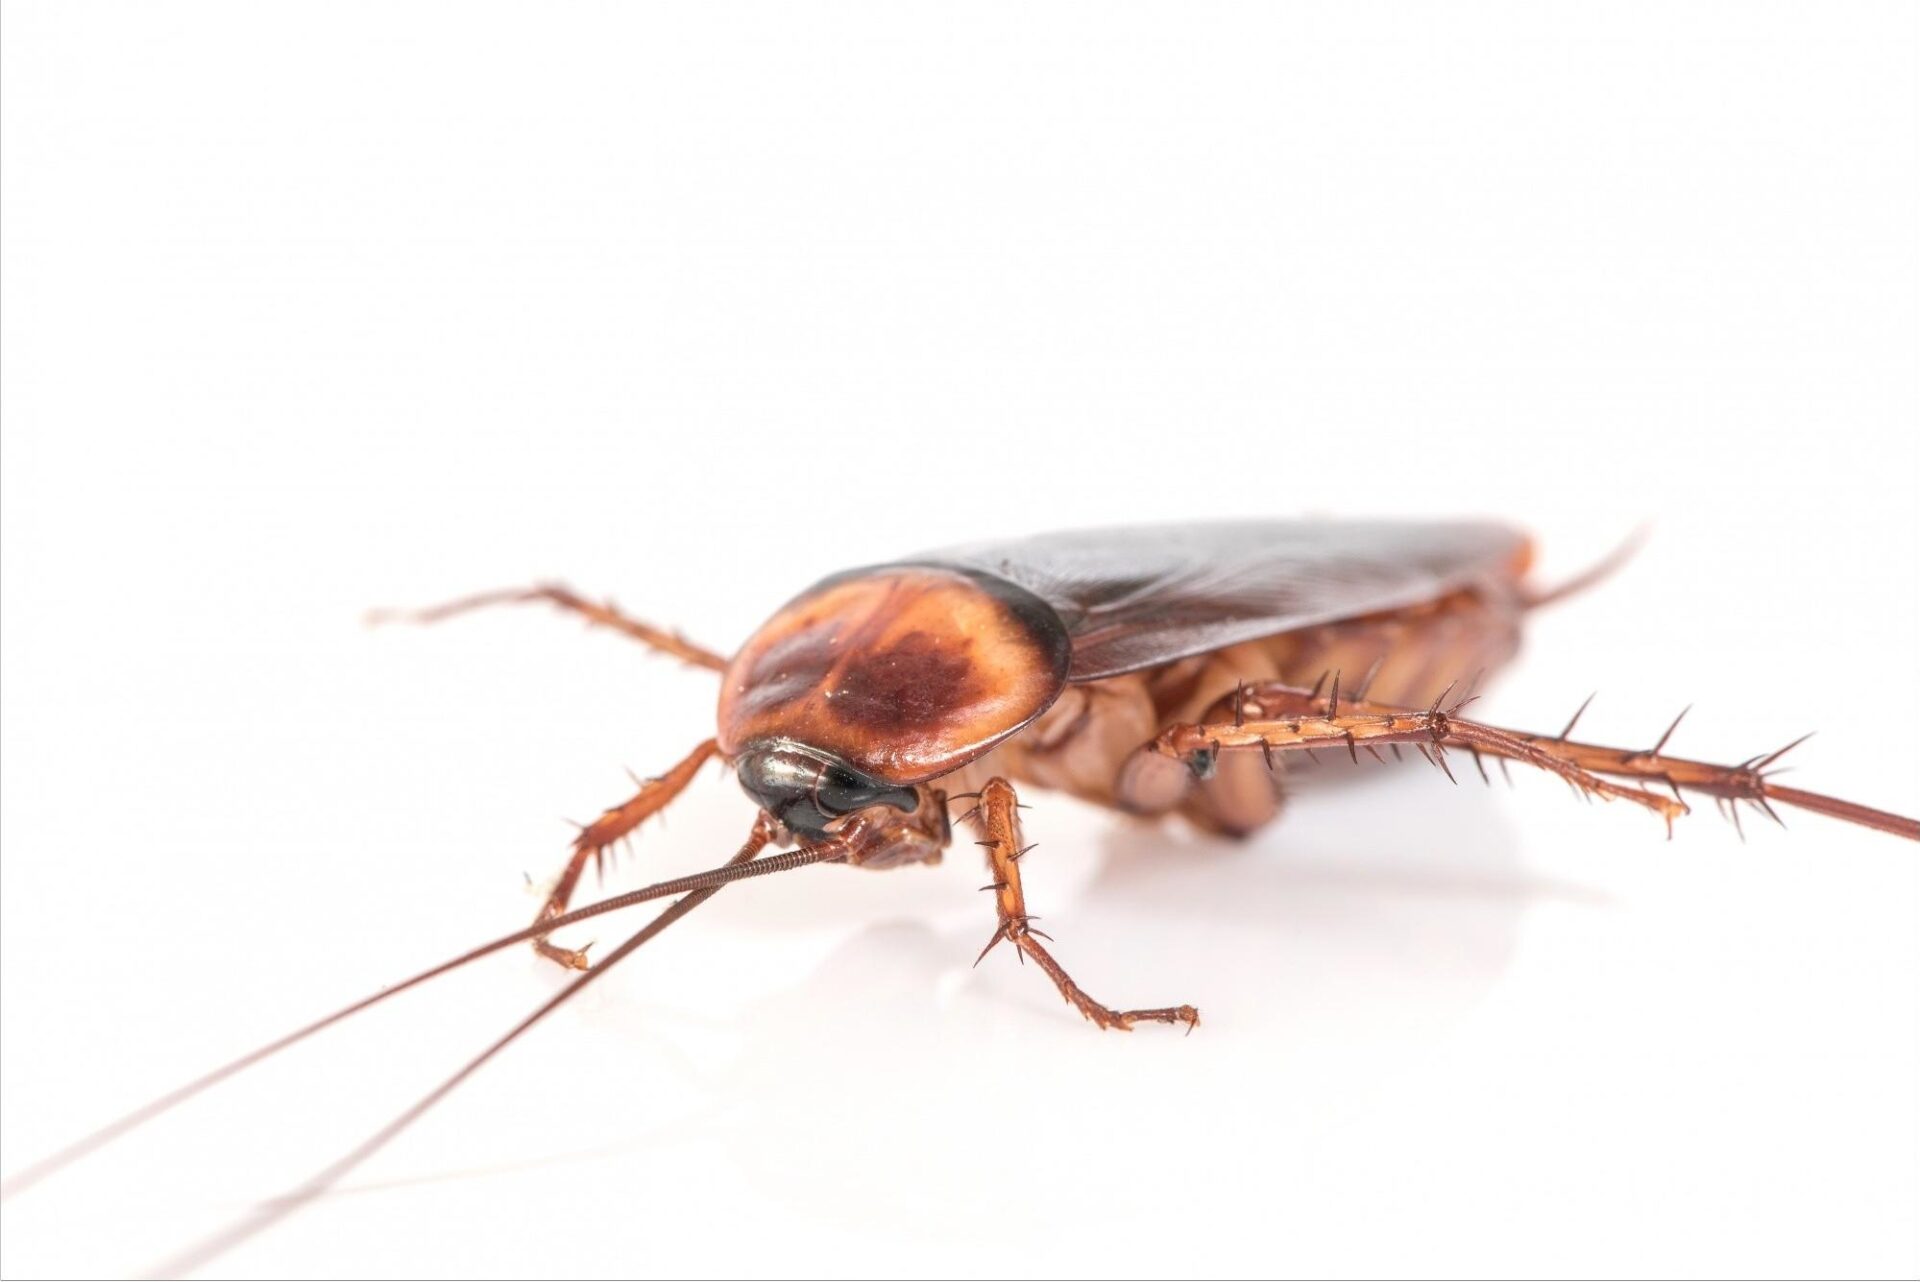 A cockroach startup is kind of startup that stands resilient to any economic crisis or changes in consumer behaviour.